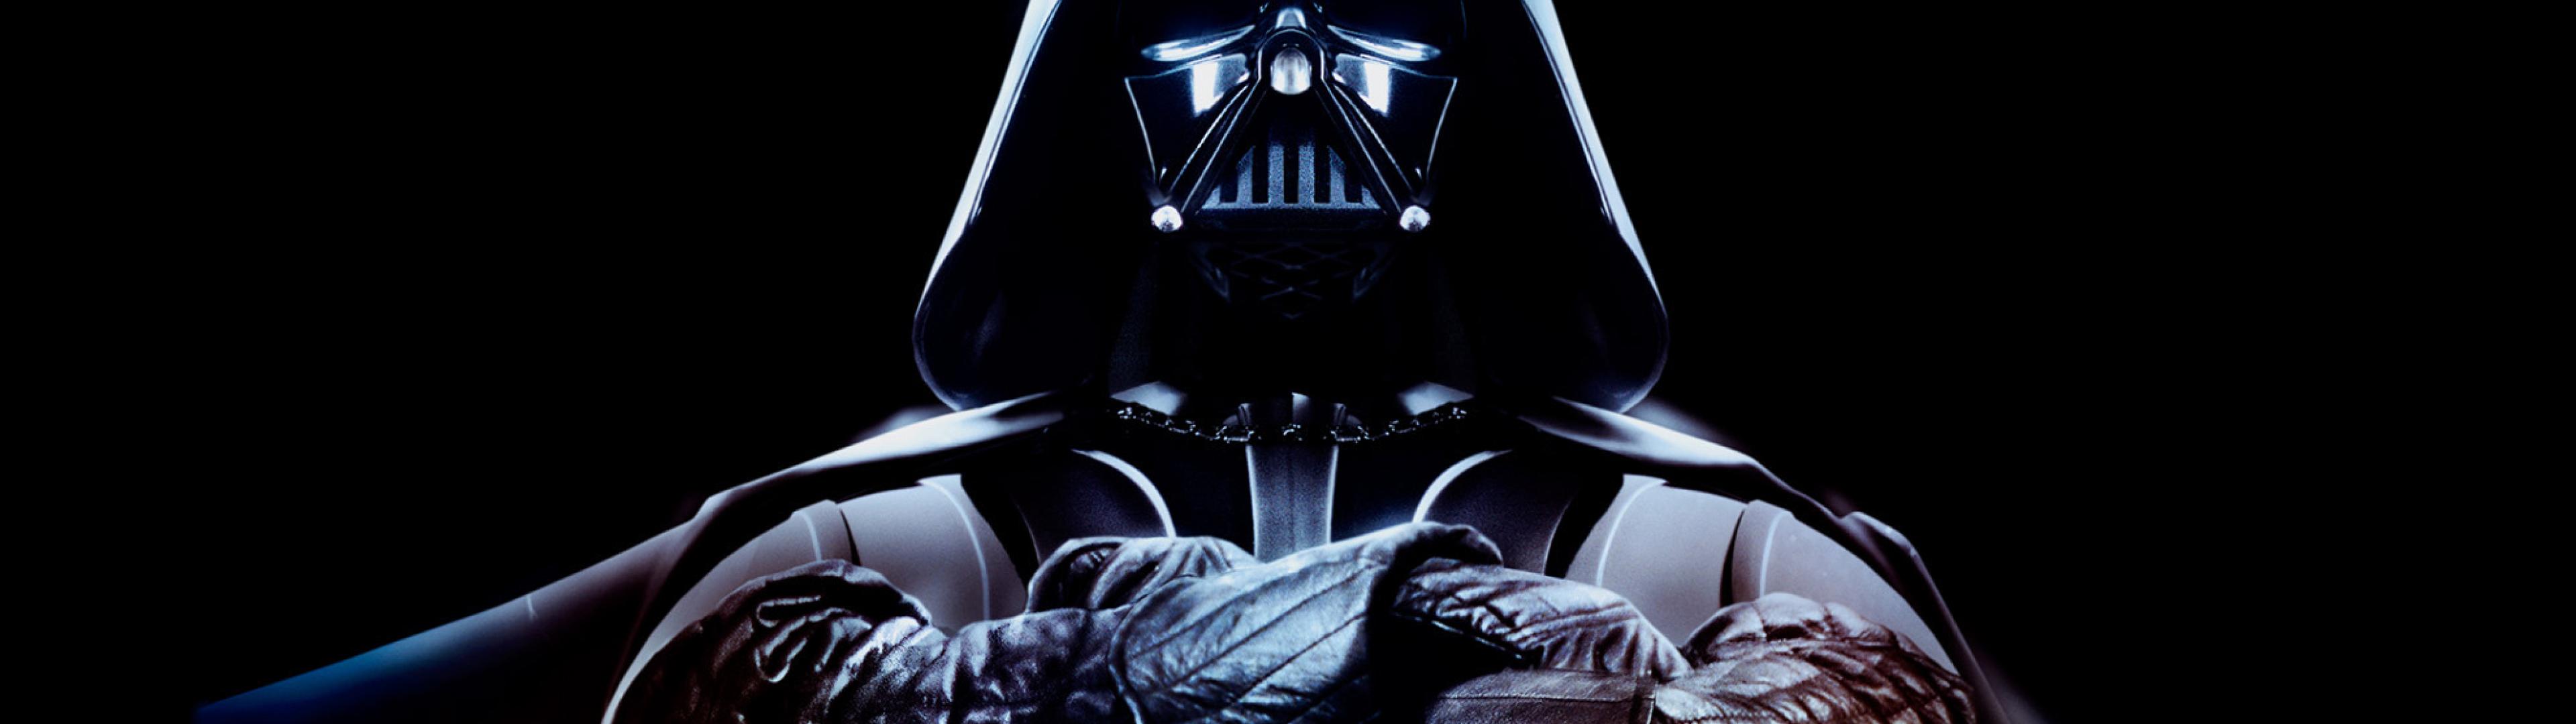 Free download star wars darth vader Ultra or Dual High Definition